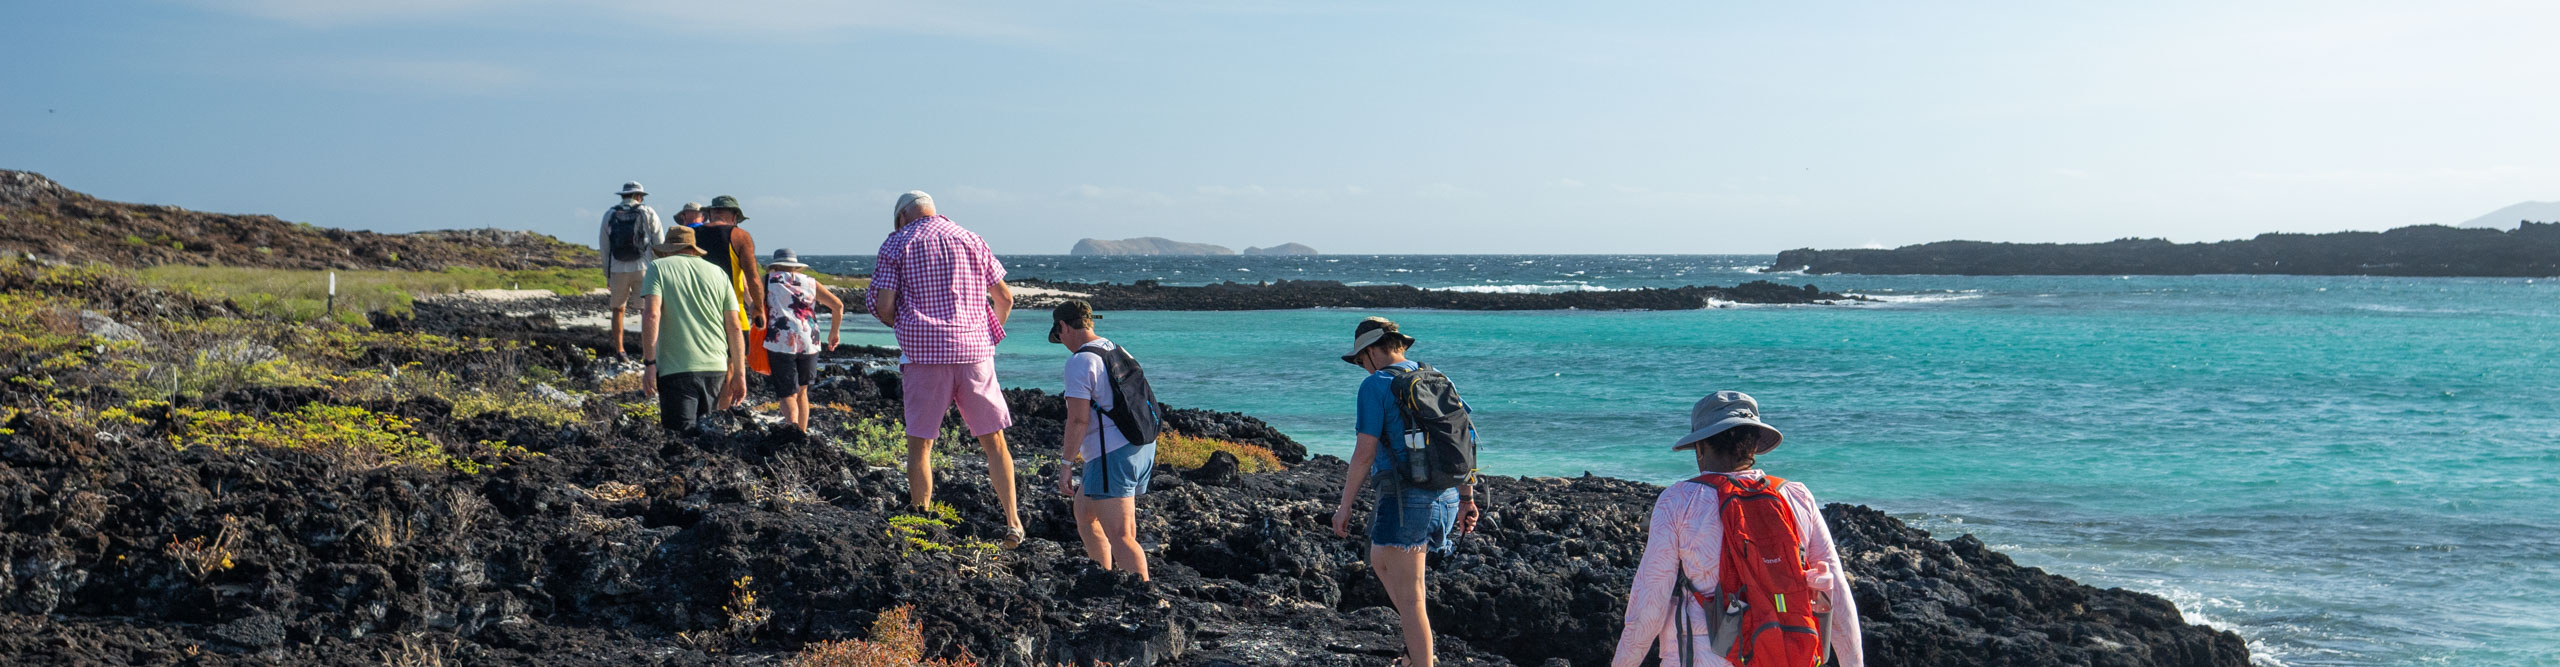 Trekking on Sombrero Chino in the Galapagos Islands